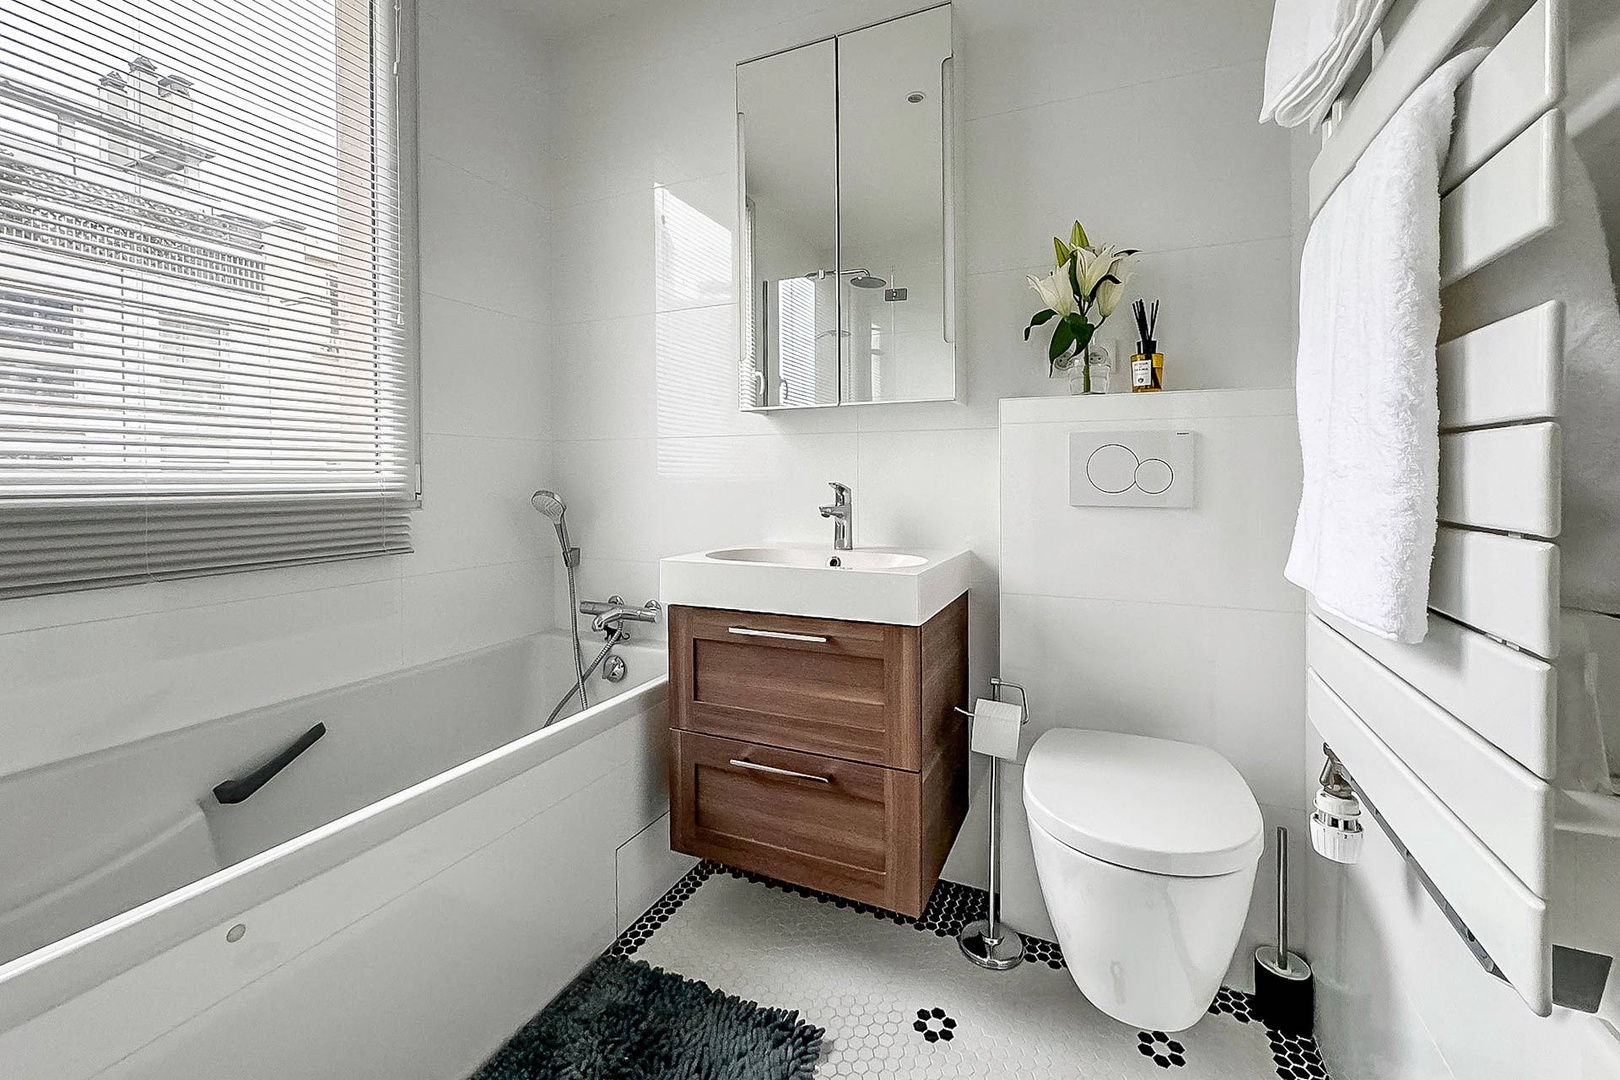 Two beautiful bathrooms for a comfortable stay.